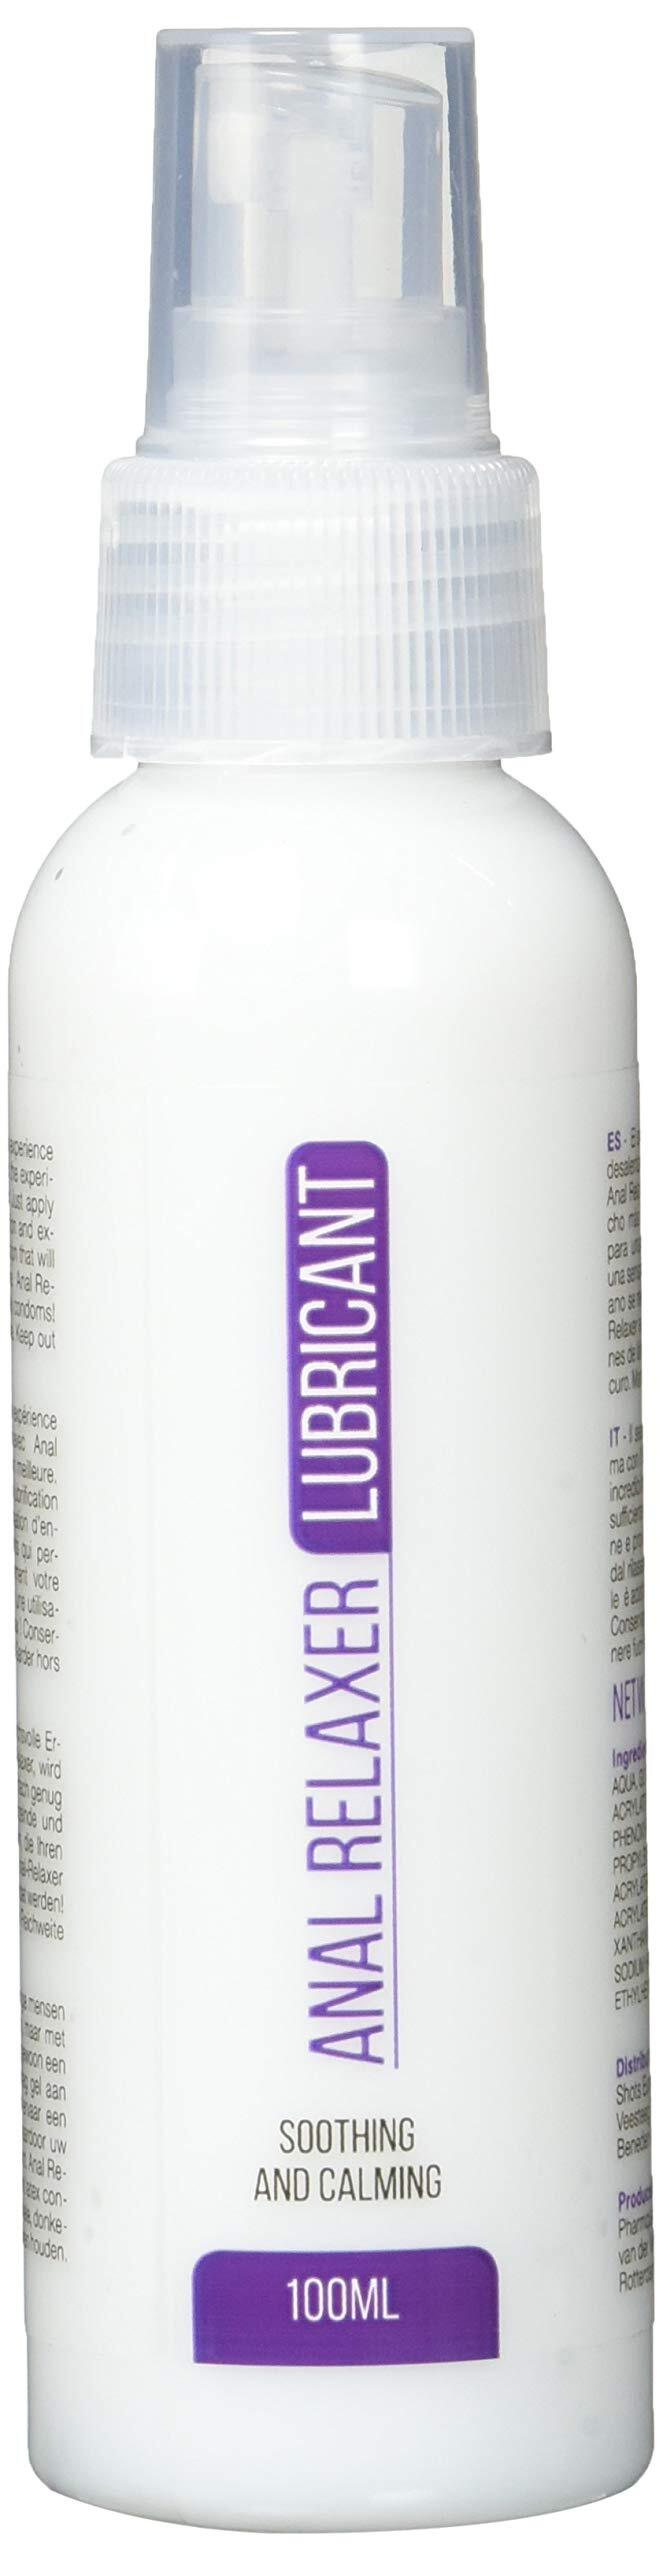 PharmQuests Anal Relaxer Lubricant - 100 ml